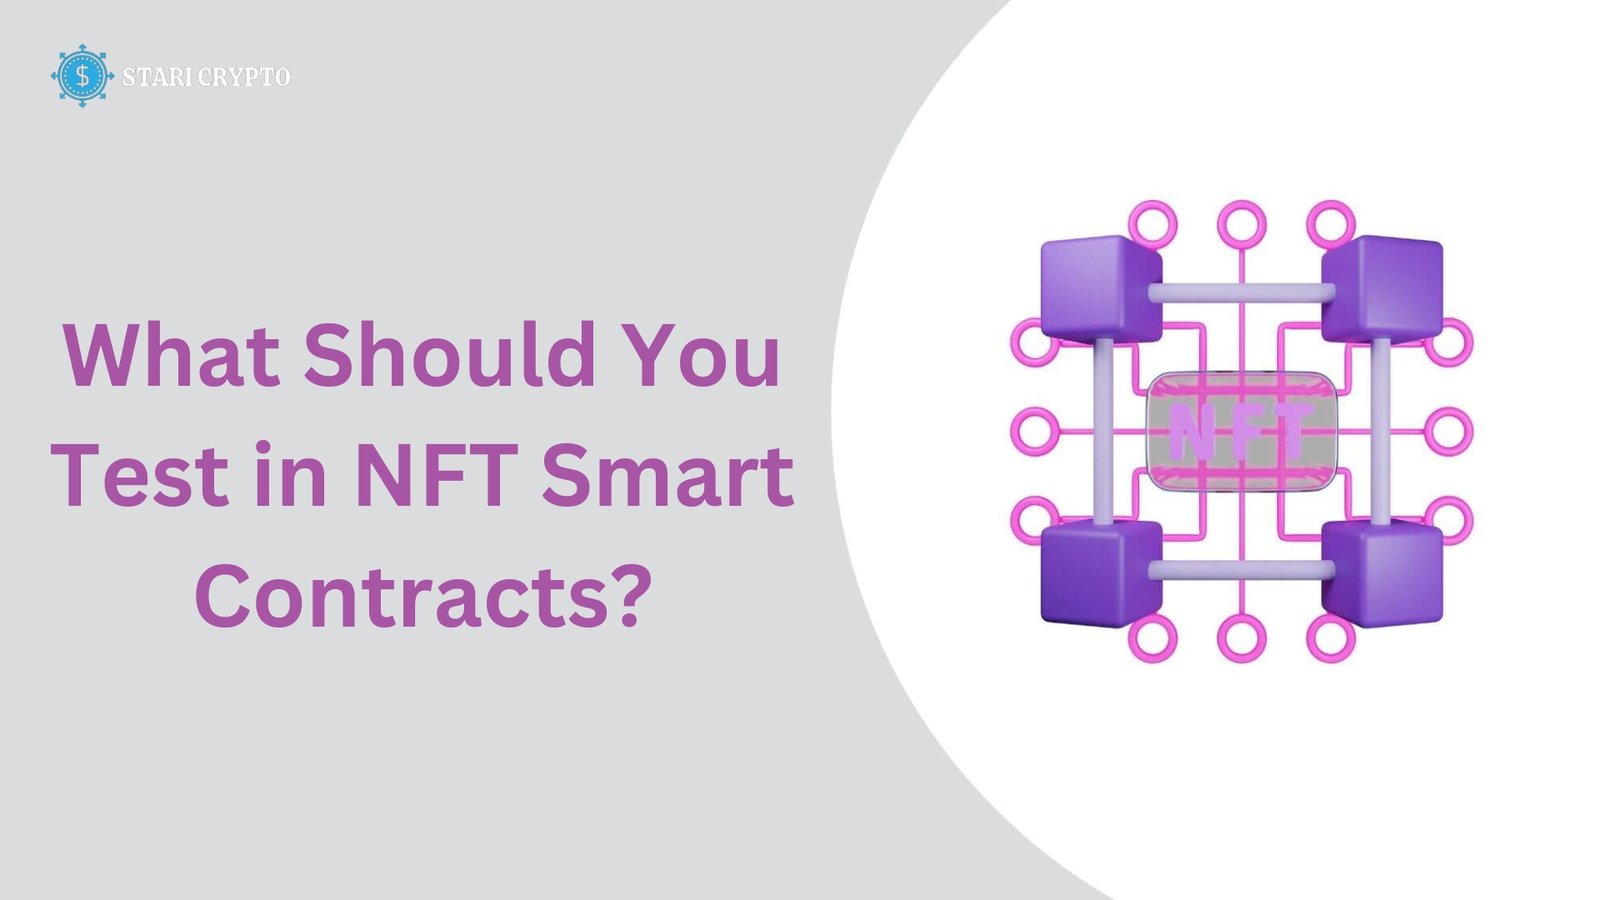 What Should You Test in NFT Smart Contracts?